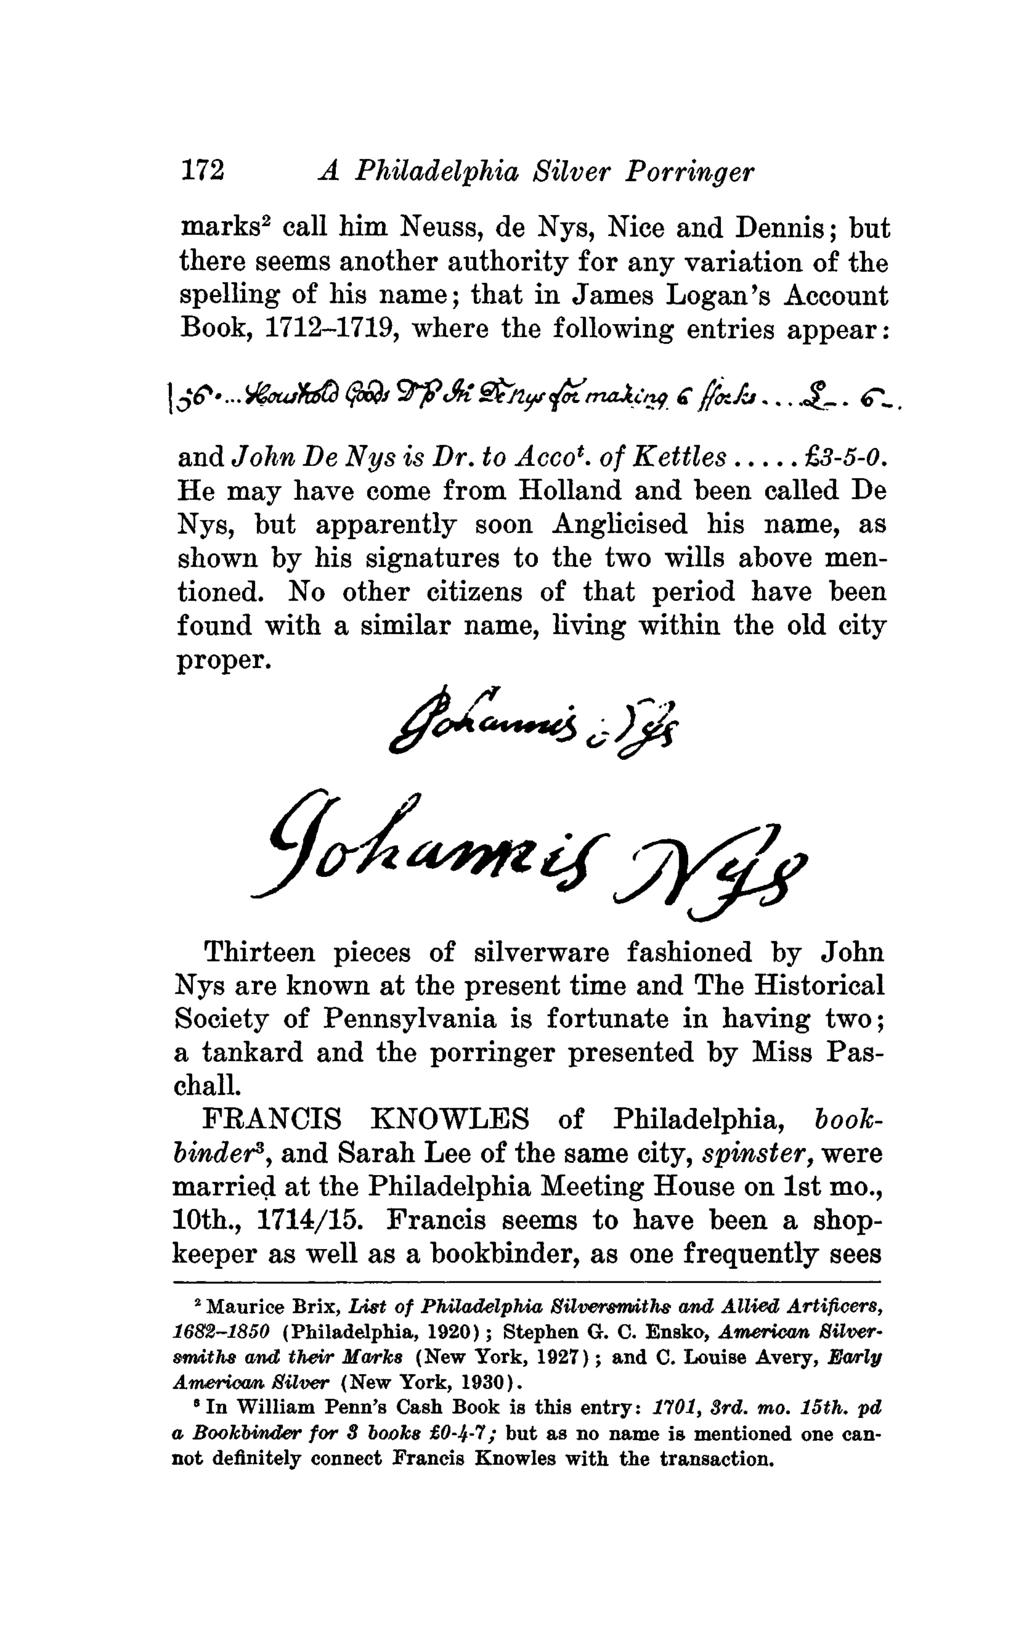 172 A Philadelphia Silver Porringer marks 2 call him Neuss, de Nys, Nice and Dennis; but there seems another authority for any variation of the spelling of his name; that in James Logan's Account